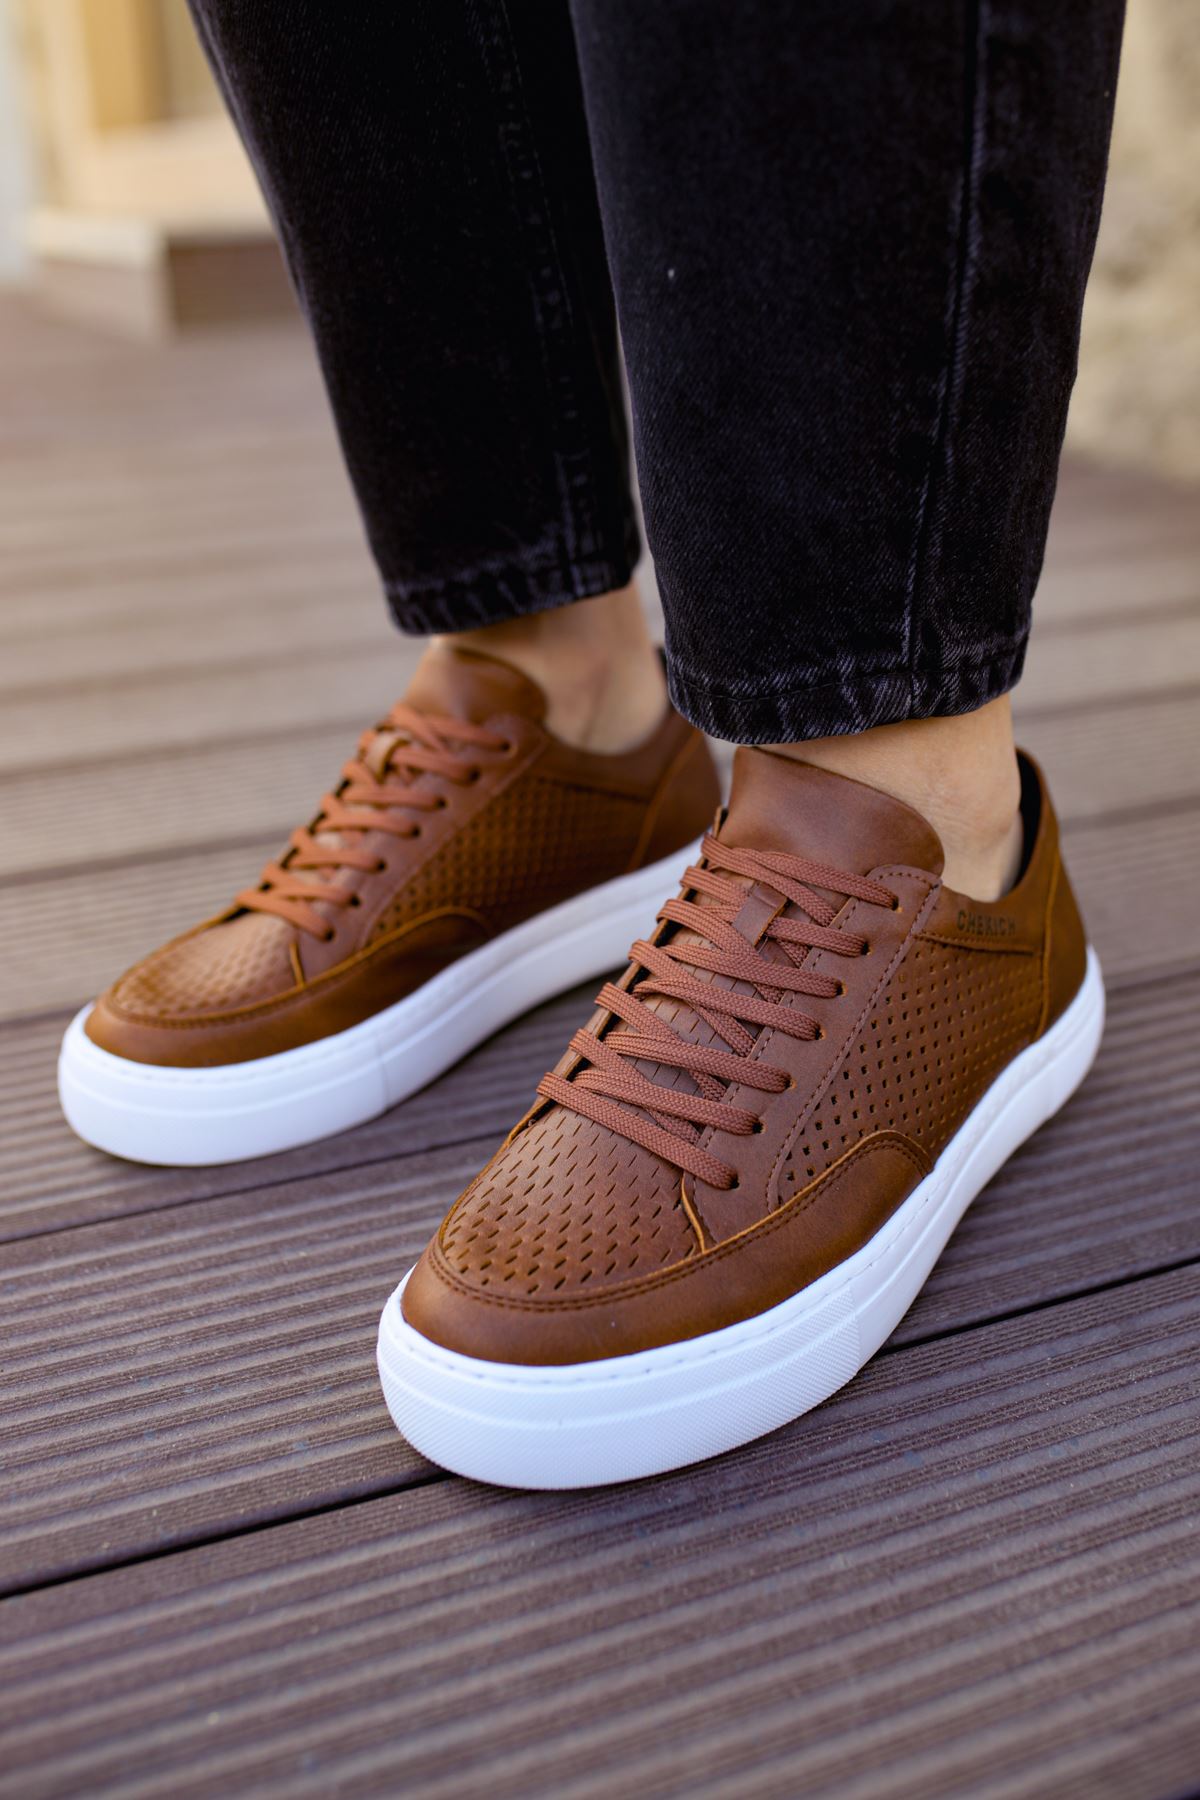 Chekich Shoes for Men Brown Artificial Leather 2021 Fall Season Casual Comfortable Flexible Fashion Sneakers Wedding Orthopedic Walking Odorless High and White Outsole Sport Lightweight Running Breathable CH015 V7